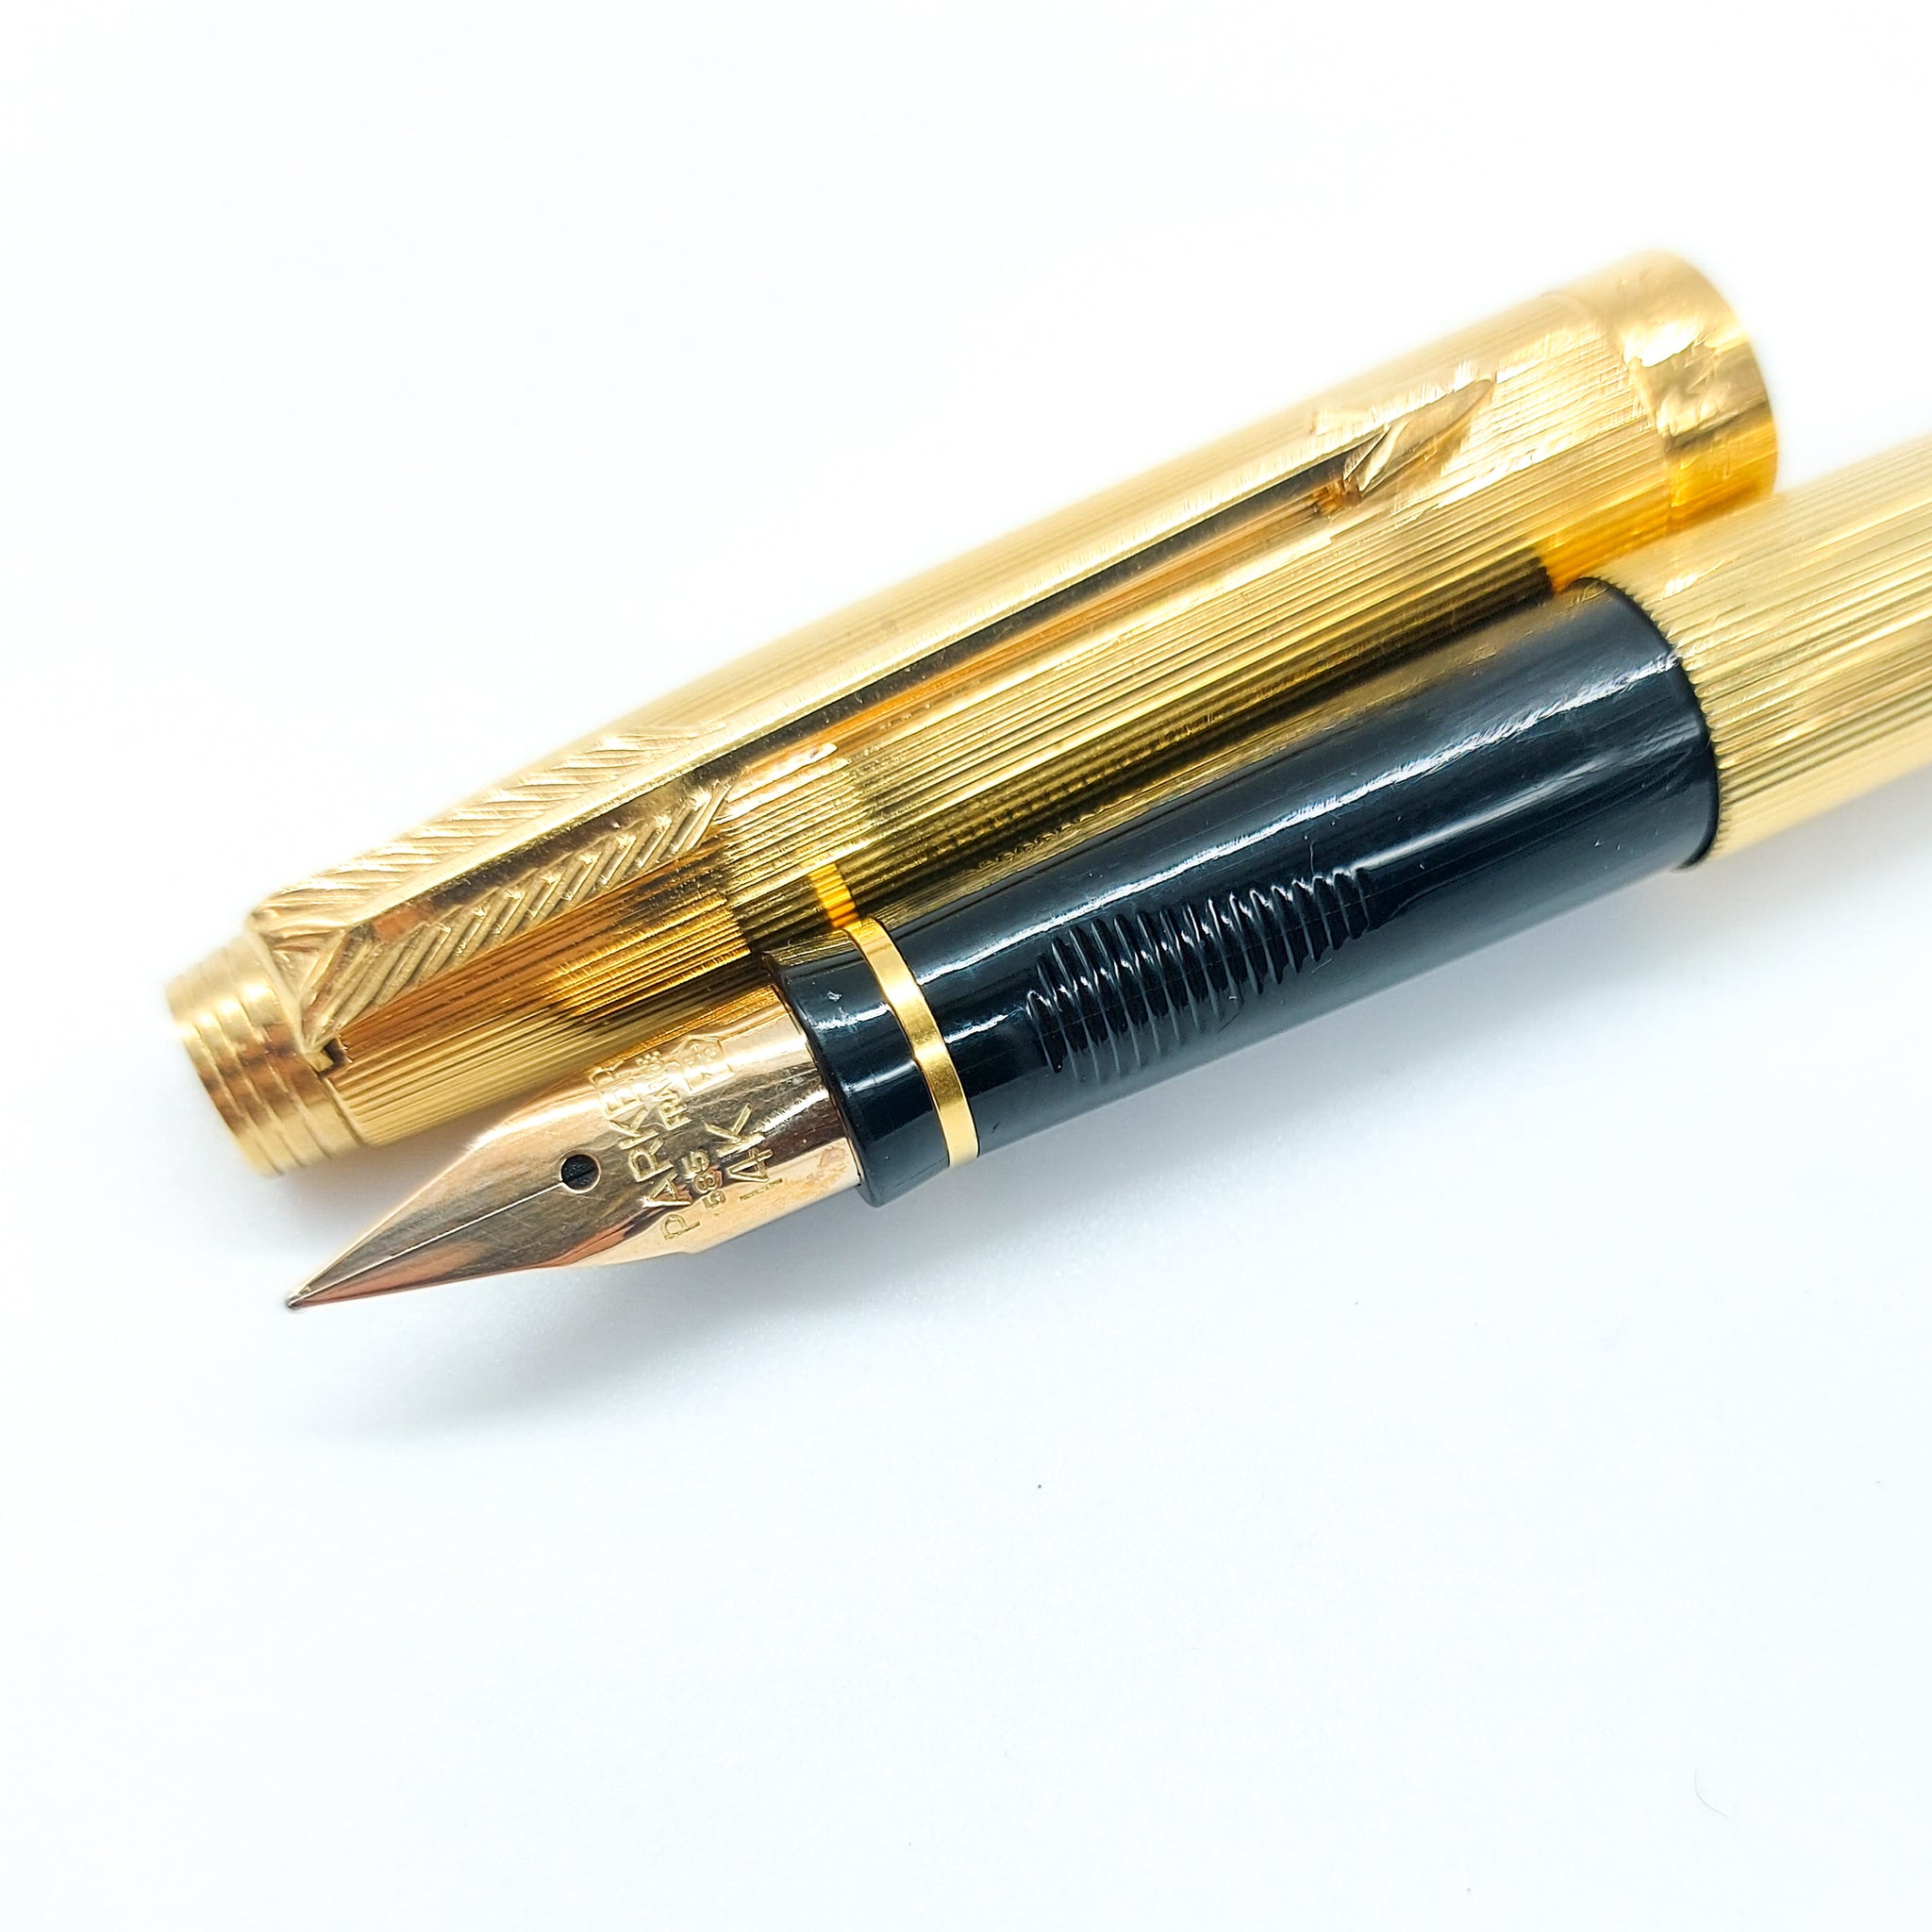 Parker 51 Deluxe Fountain Pen | Black Barrel and Gold Attributes | Medium  Nib in 18 Carat Gold | Black Ink Cartridge | Delivered in Gift Box